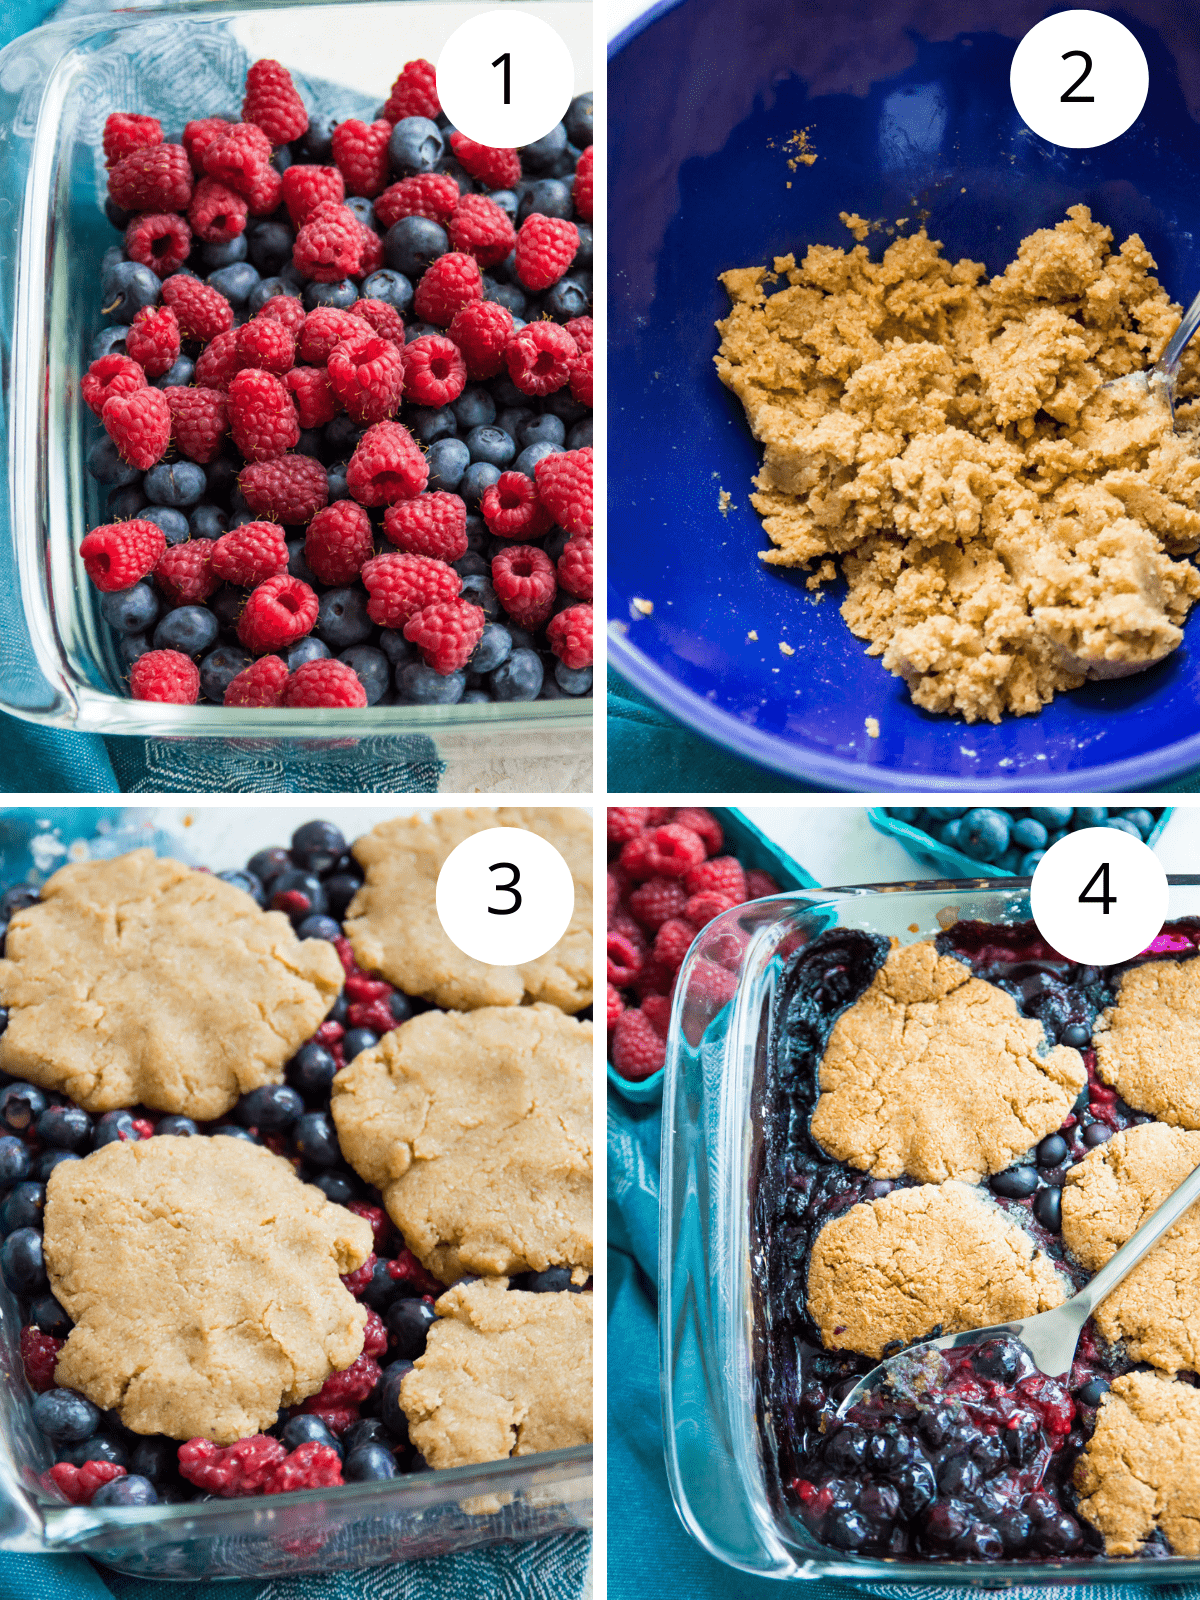 Step by step directions for making a paleo blueberry cobbler. 